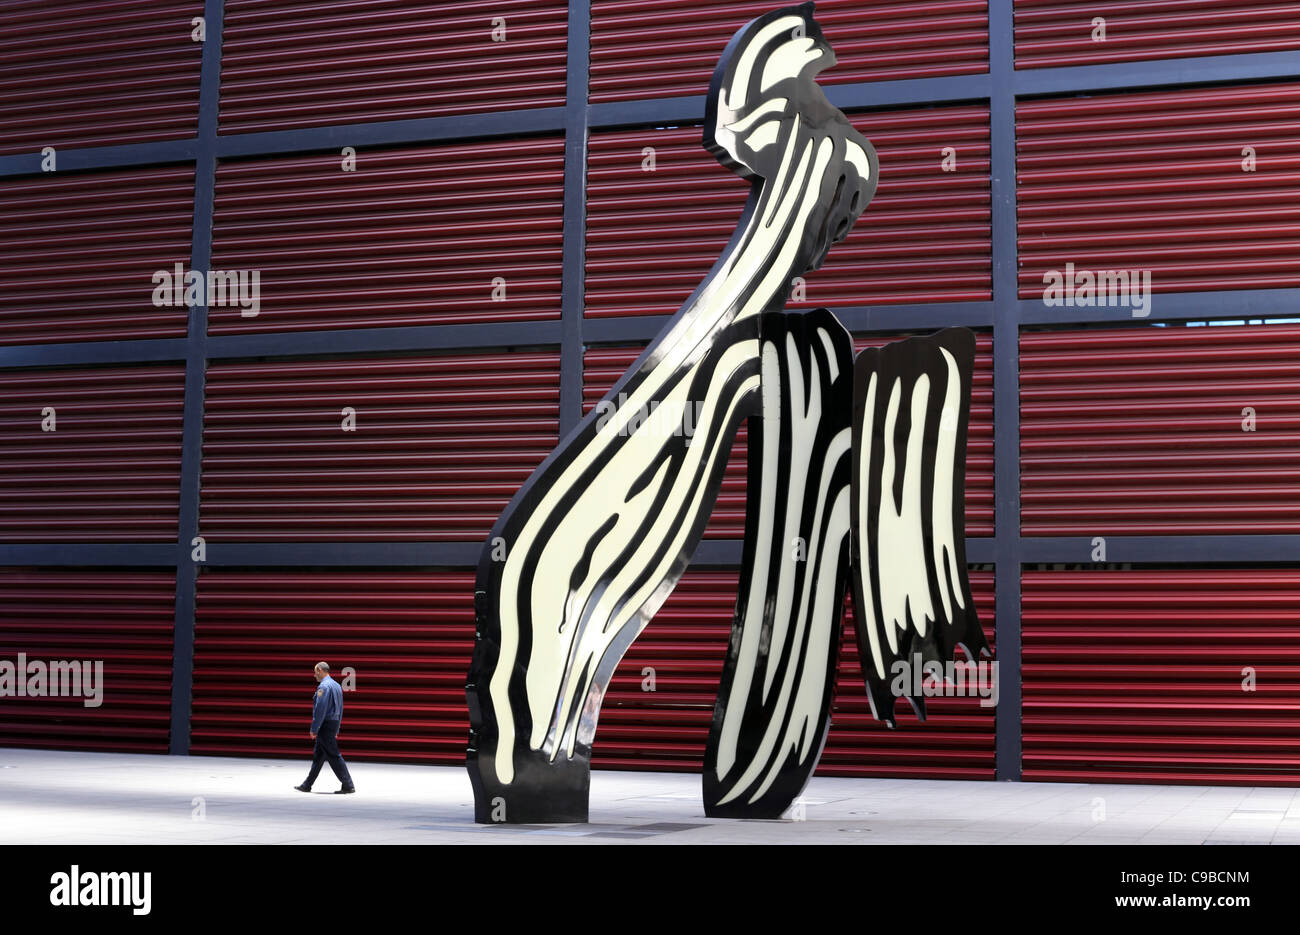 A visitor walks past a sculpture on display at the Museo Nacional Centro de Arte Reina Sofía gallery in Madrid, Spain. Stock Photo